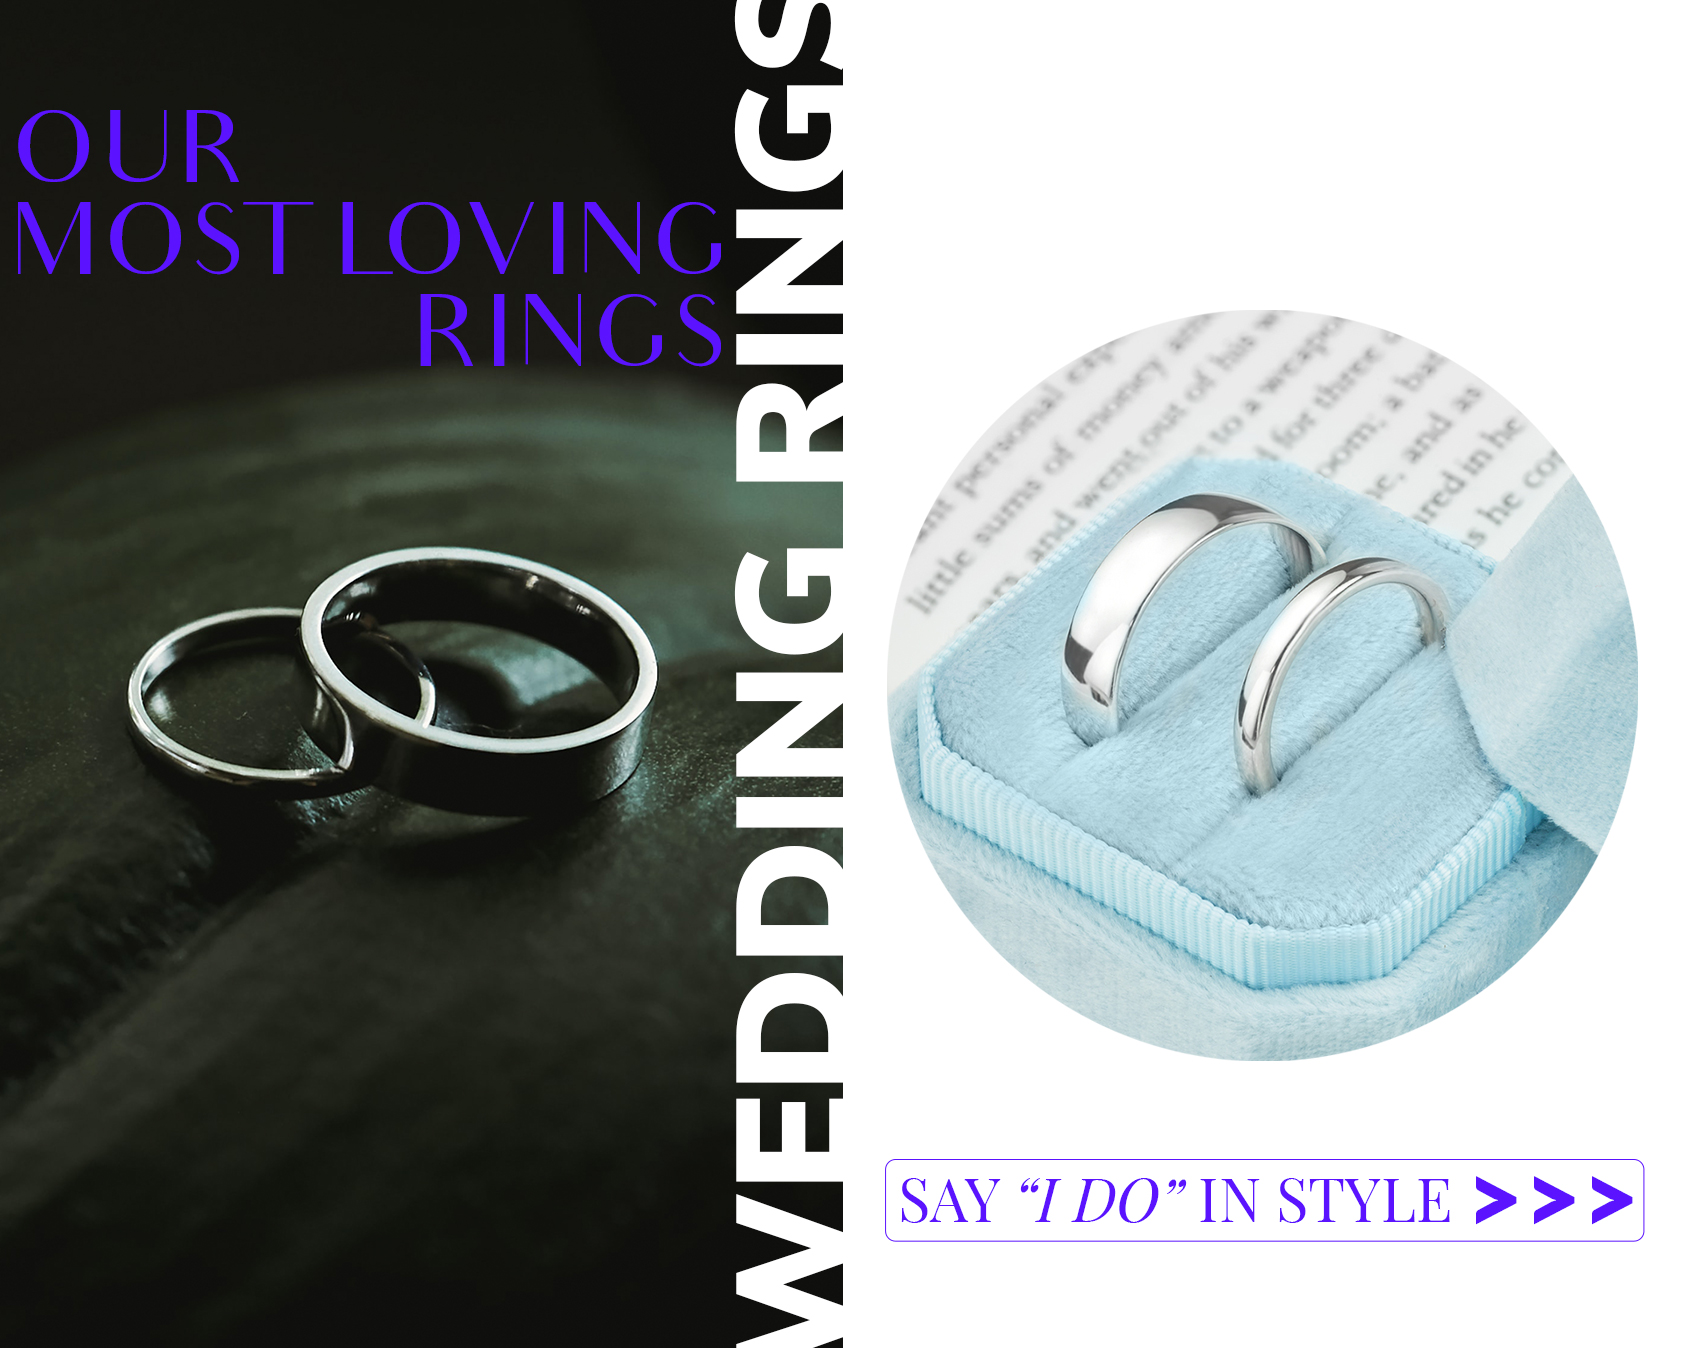 Wedding Rings - Our Most Loving Rings - Say I do in Style